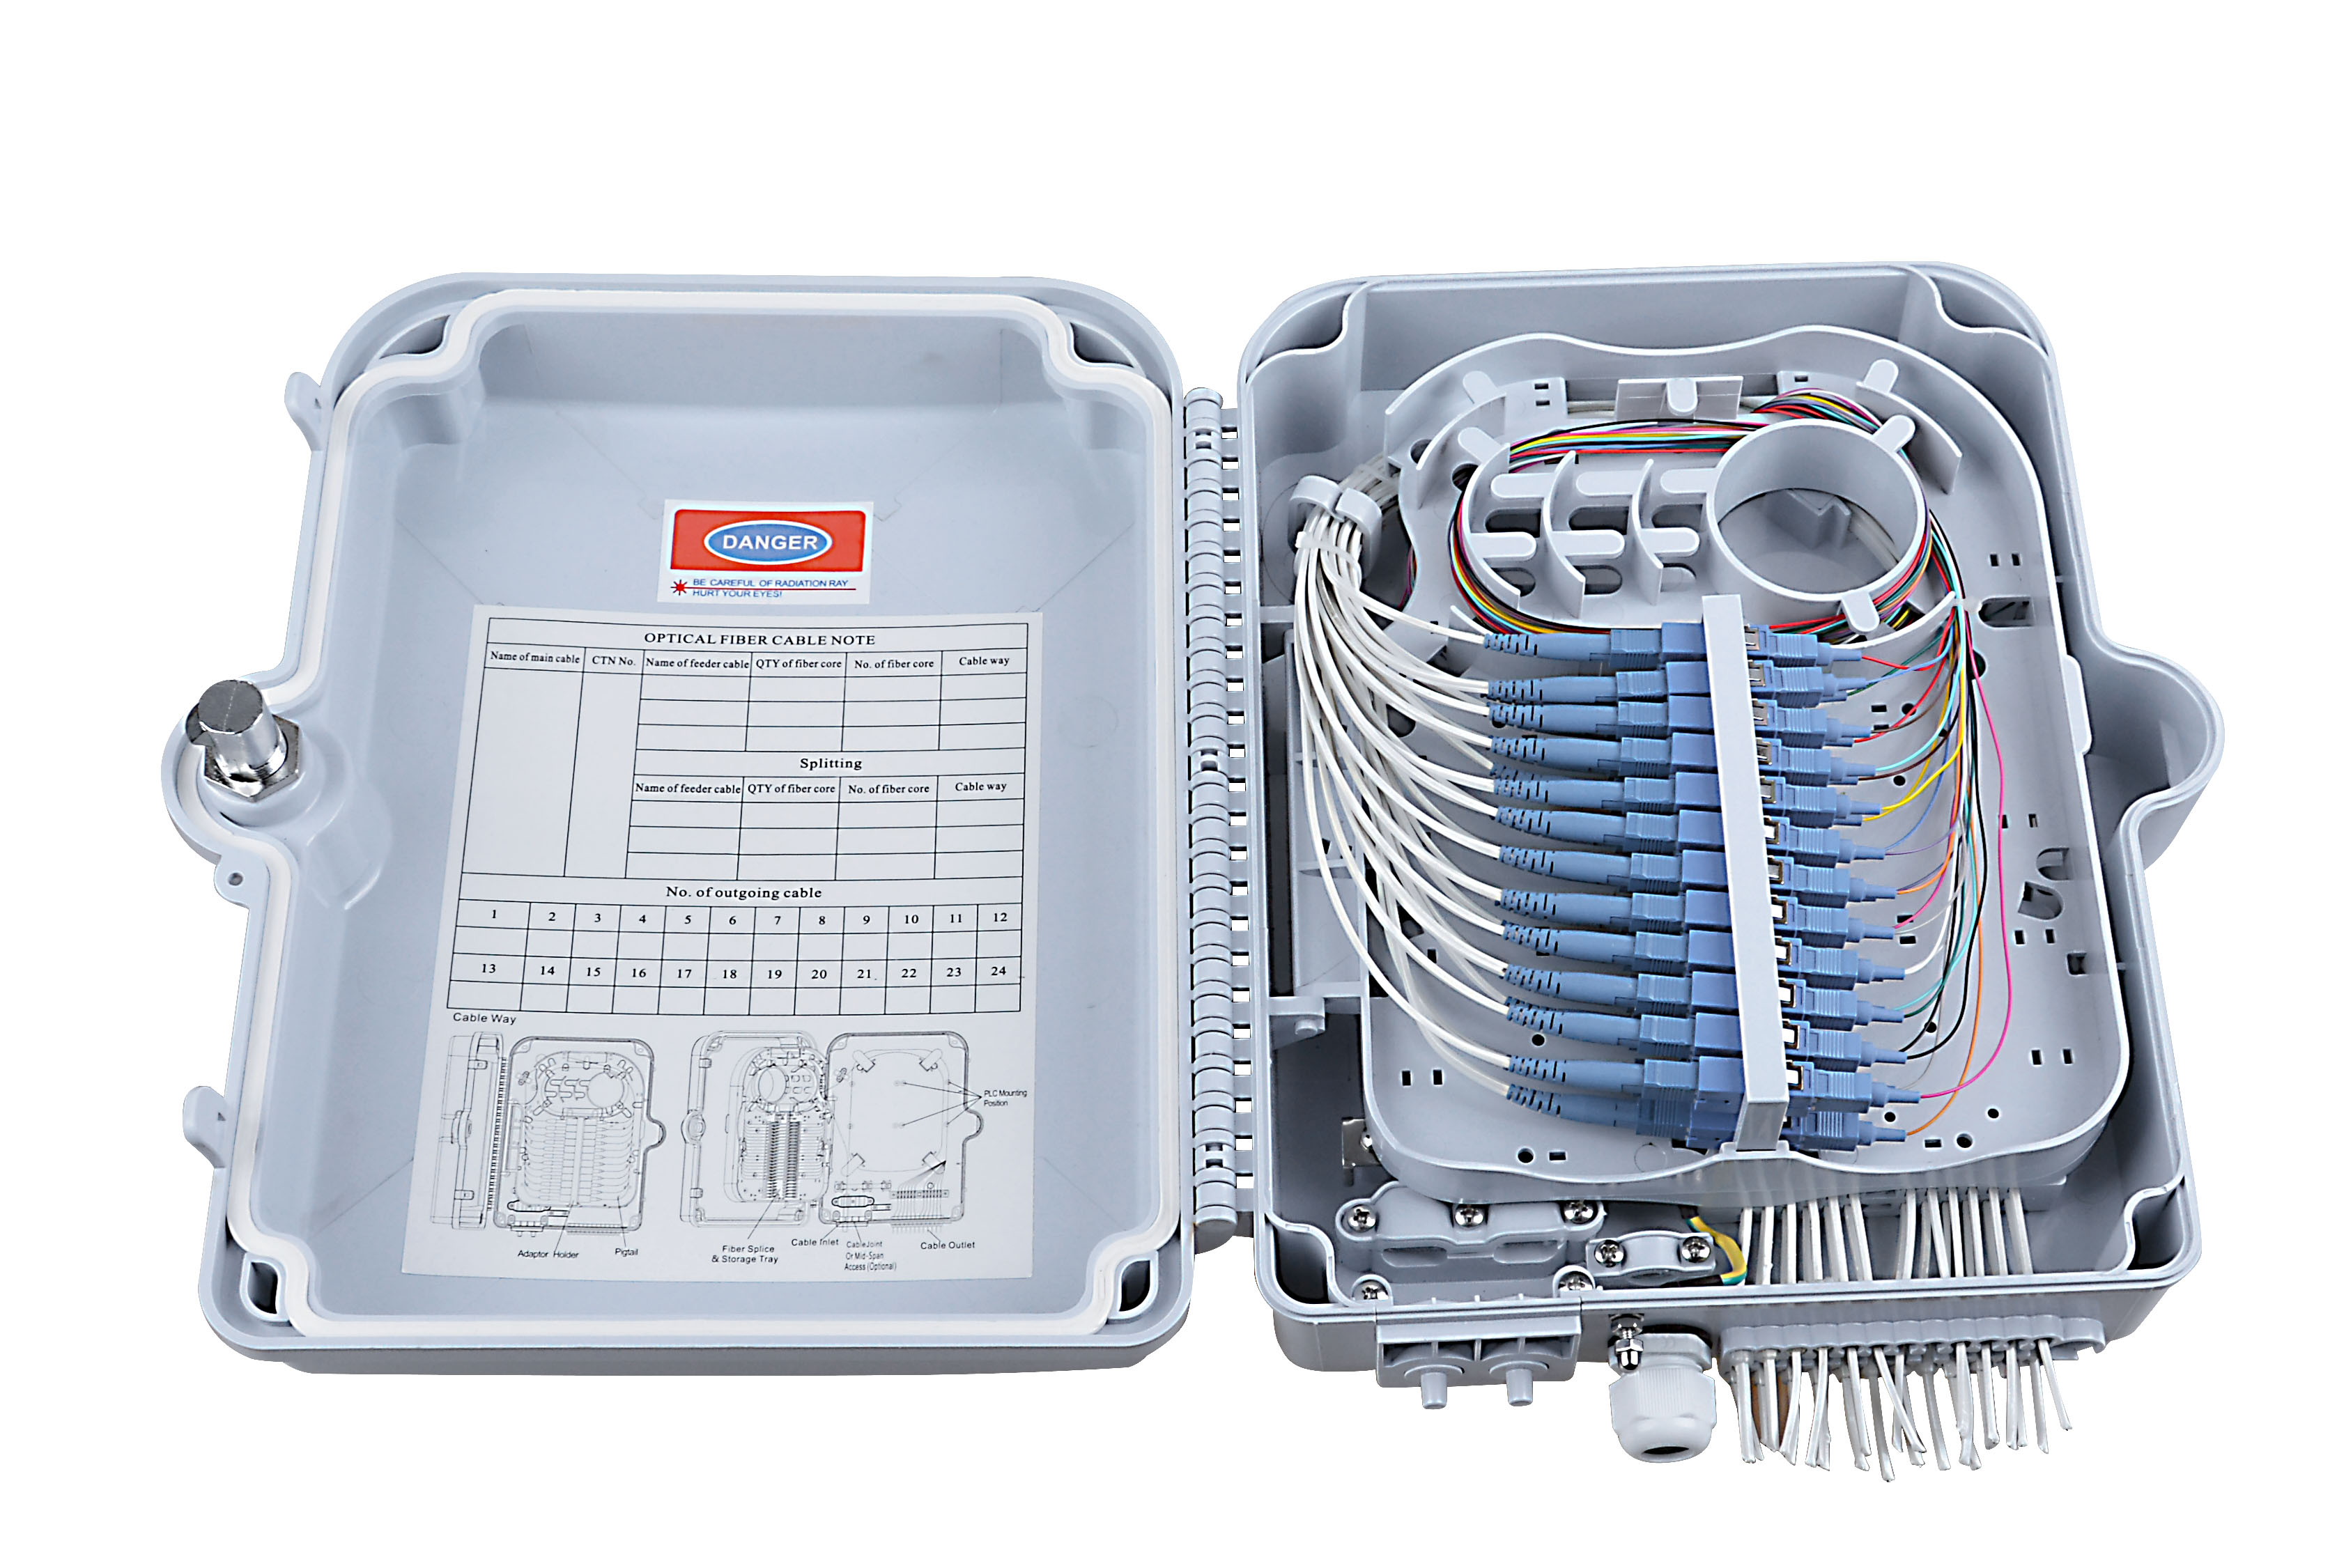 Fiber Termination Box Market Size 2021 with a CAGR of 3.8%